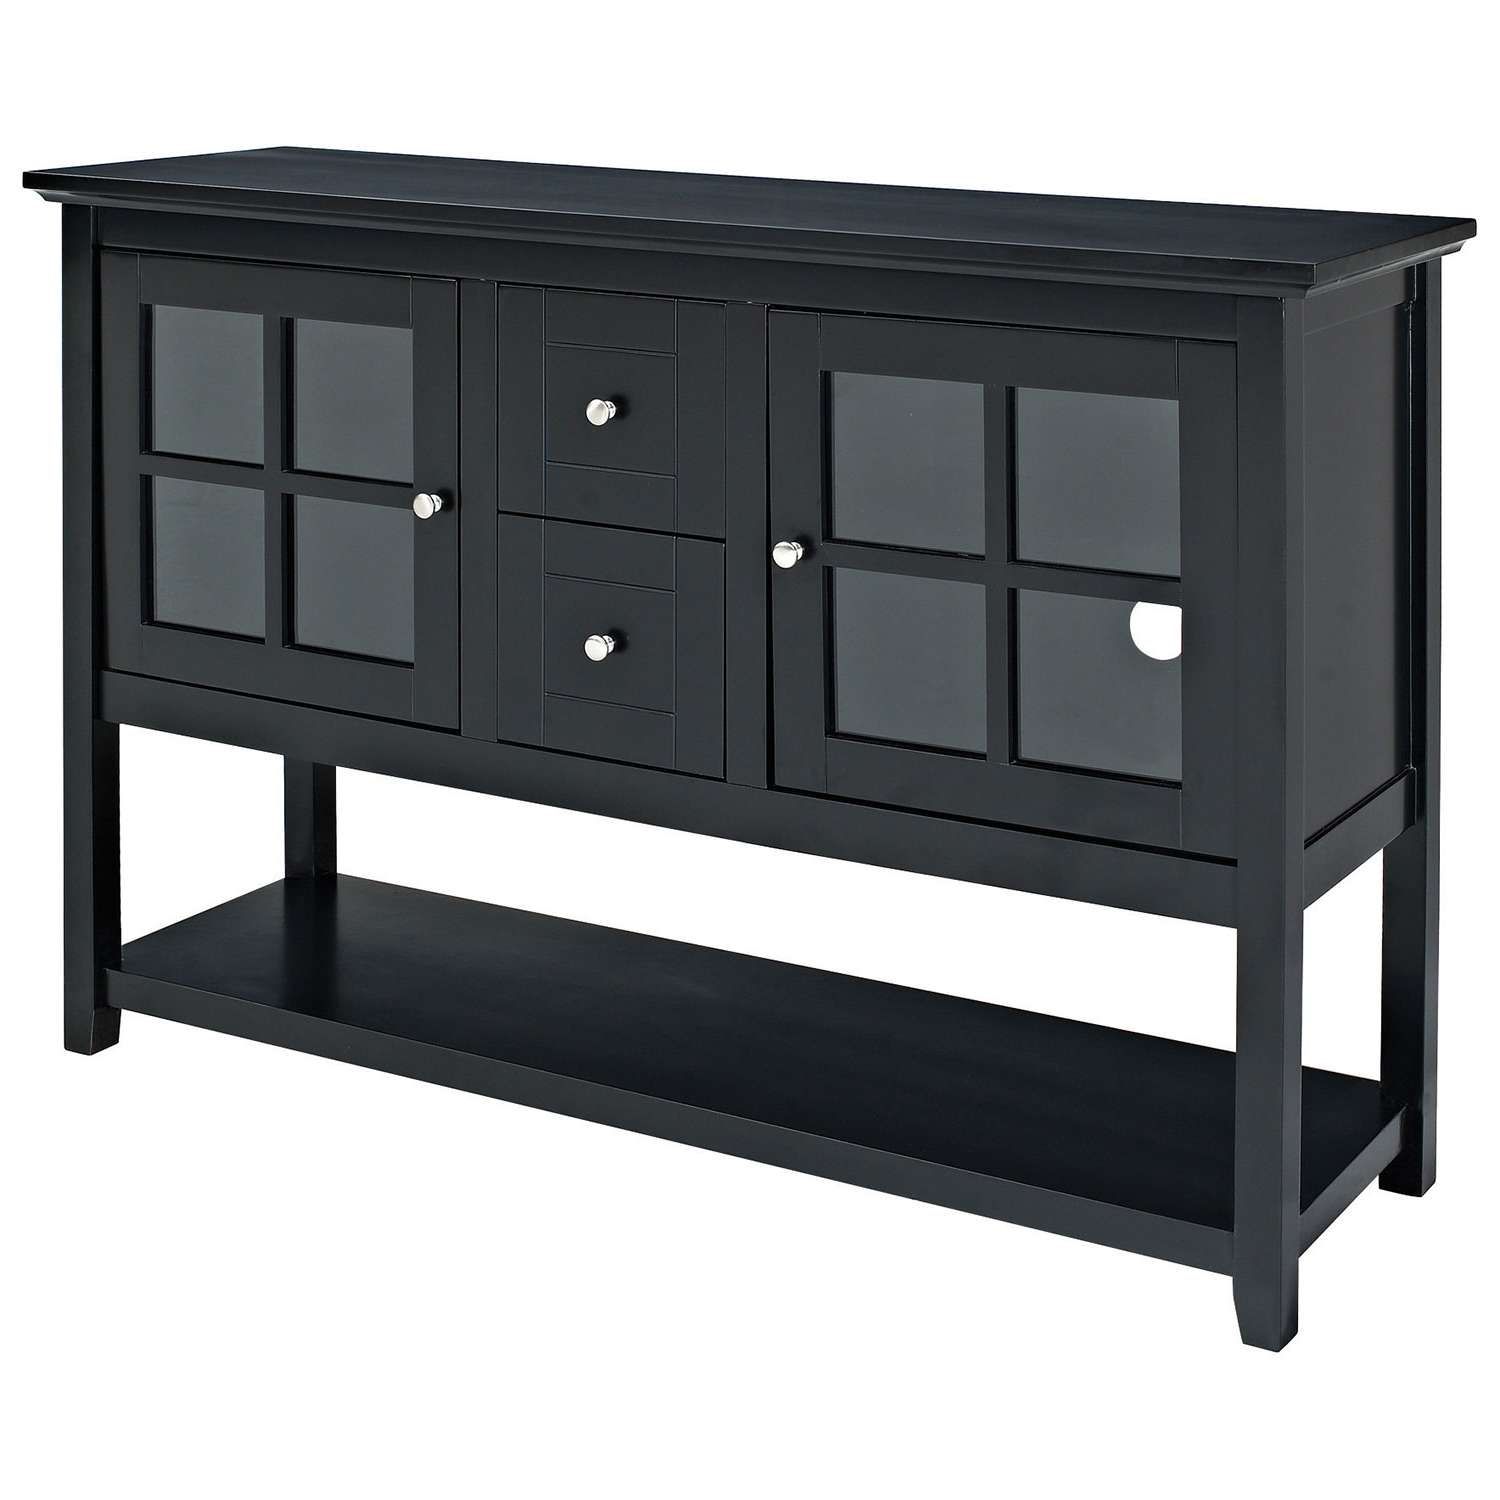 Walker Edison 55" Console Tv Stand – Black : Tv Stands – Best Buy In Black Tv Stands (Gallery 19 of 20)